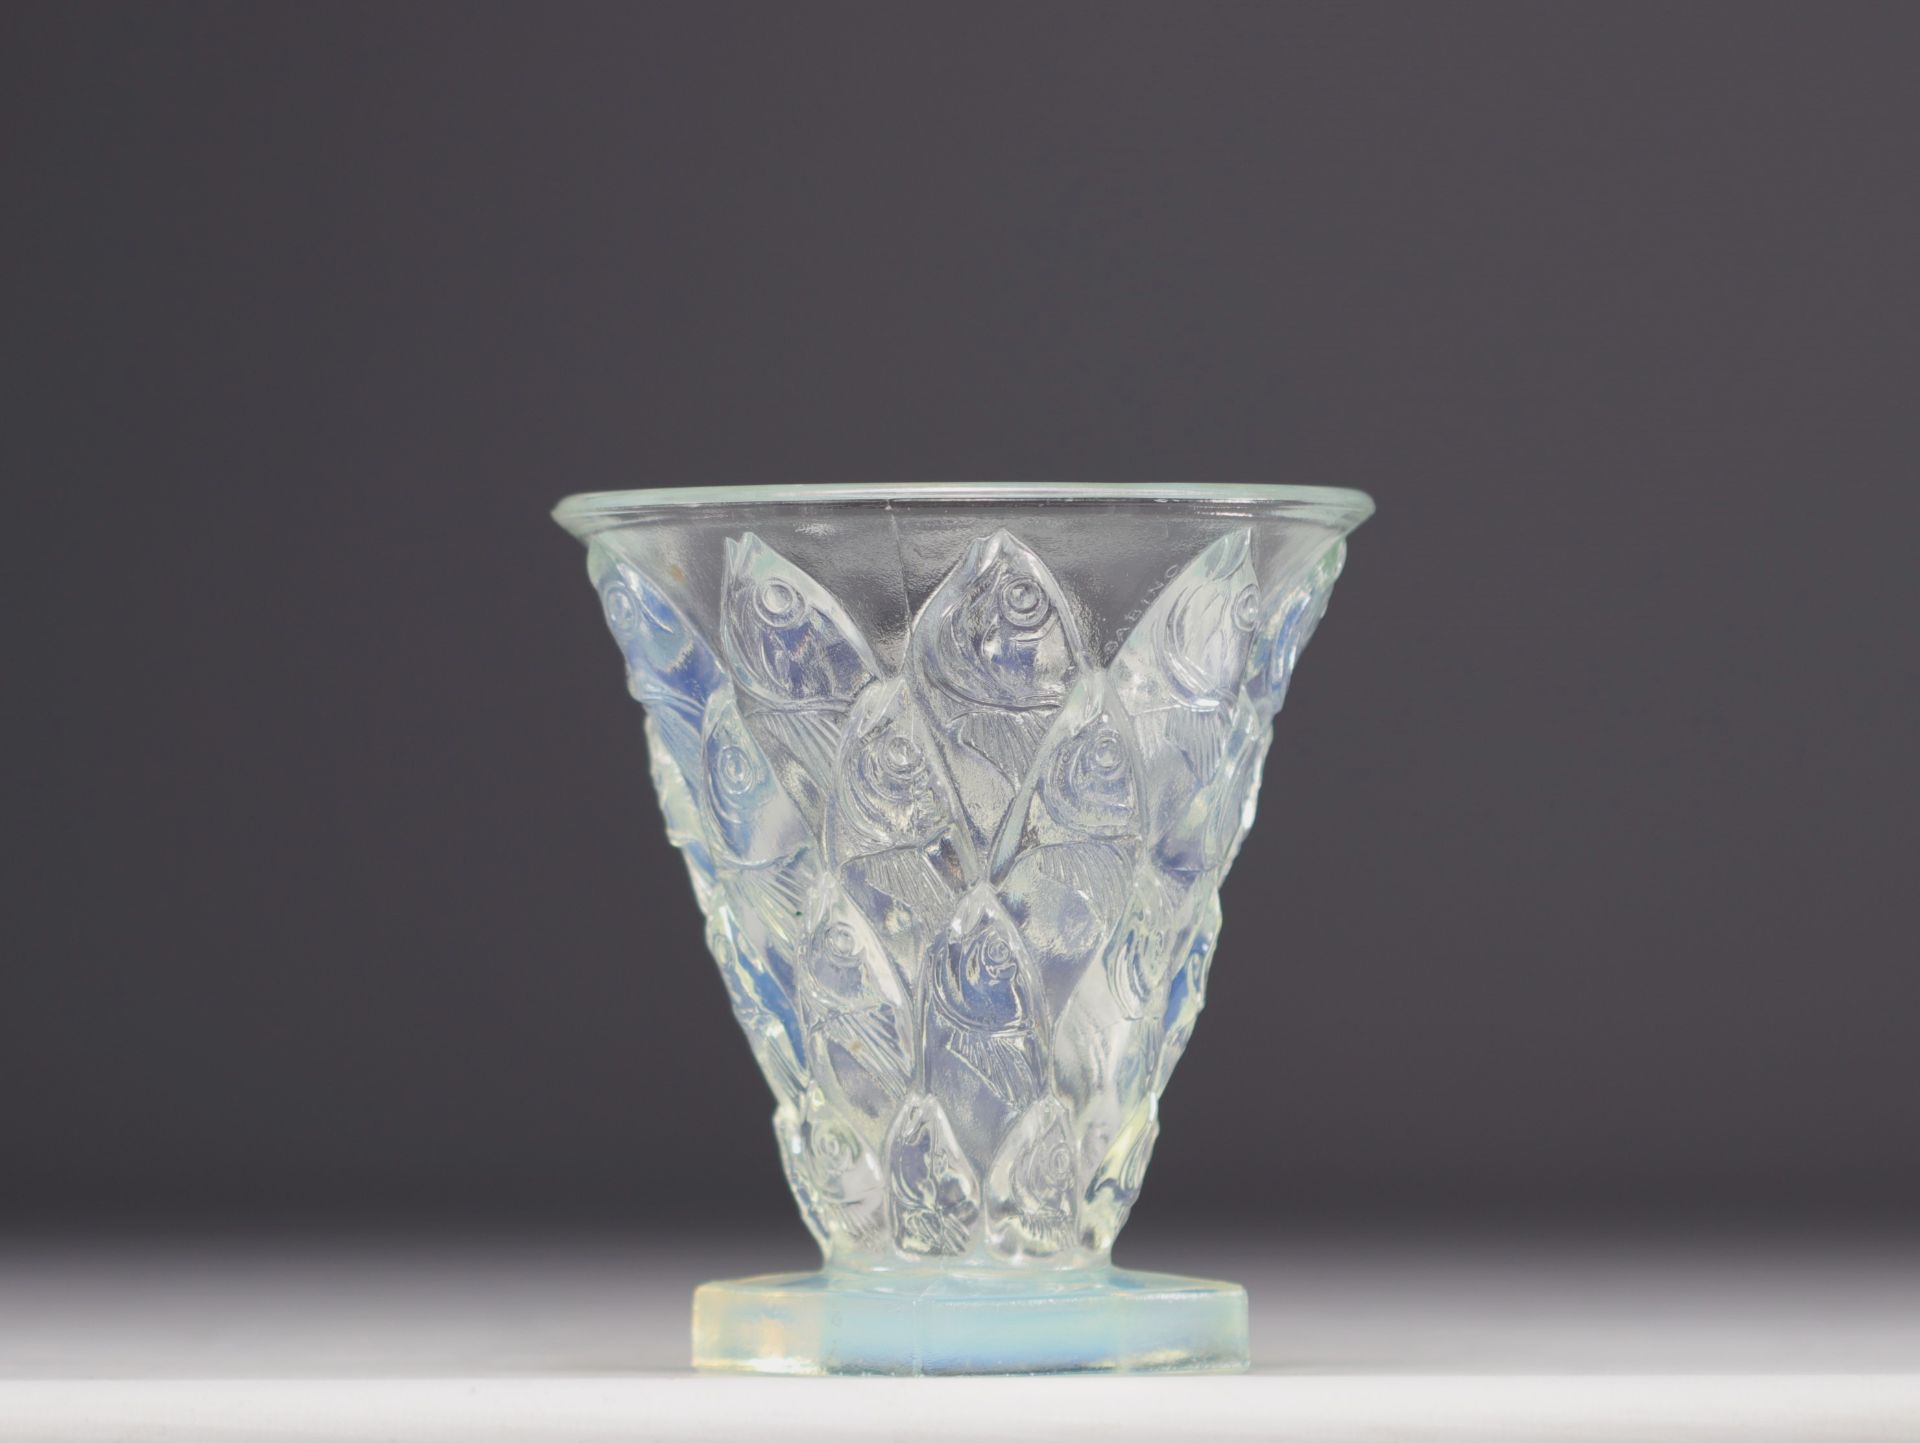 Marius SABINO (1878 -1961), "To the fish" ("Aux Poissons") vase in moulded glass. - Image 2 of 4